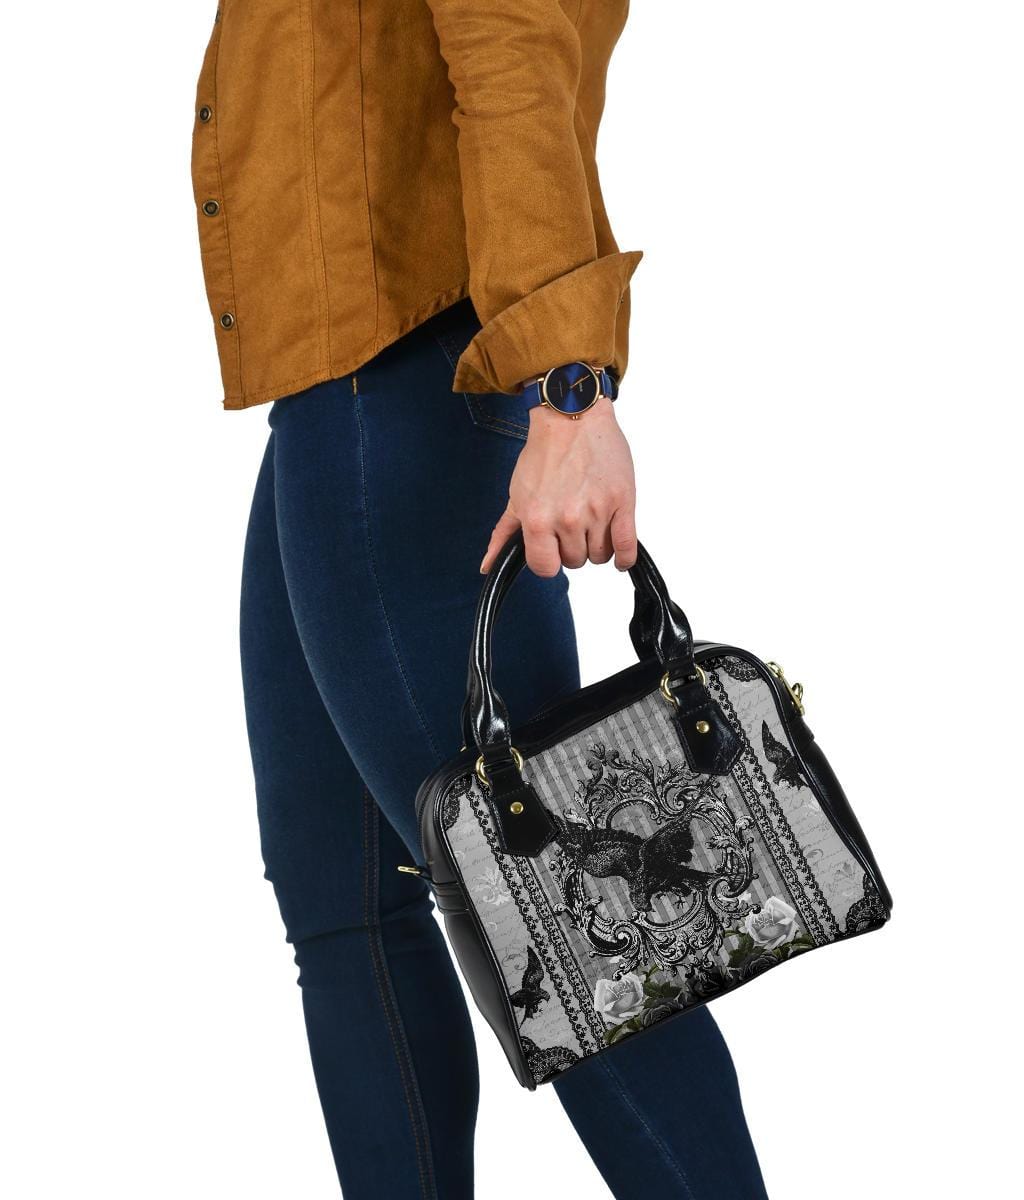 woman carrying the Raven Gothic printed PU leather handbag